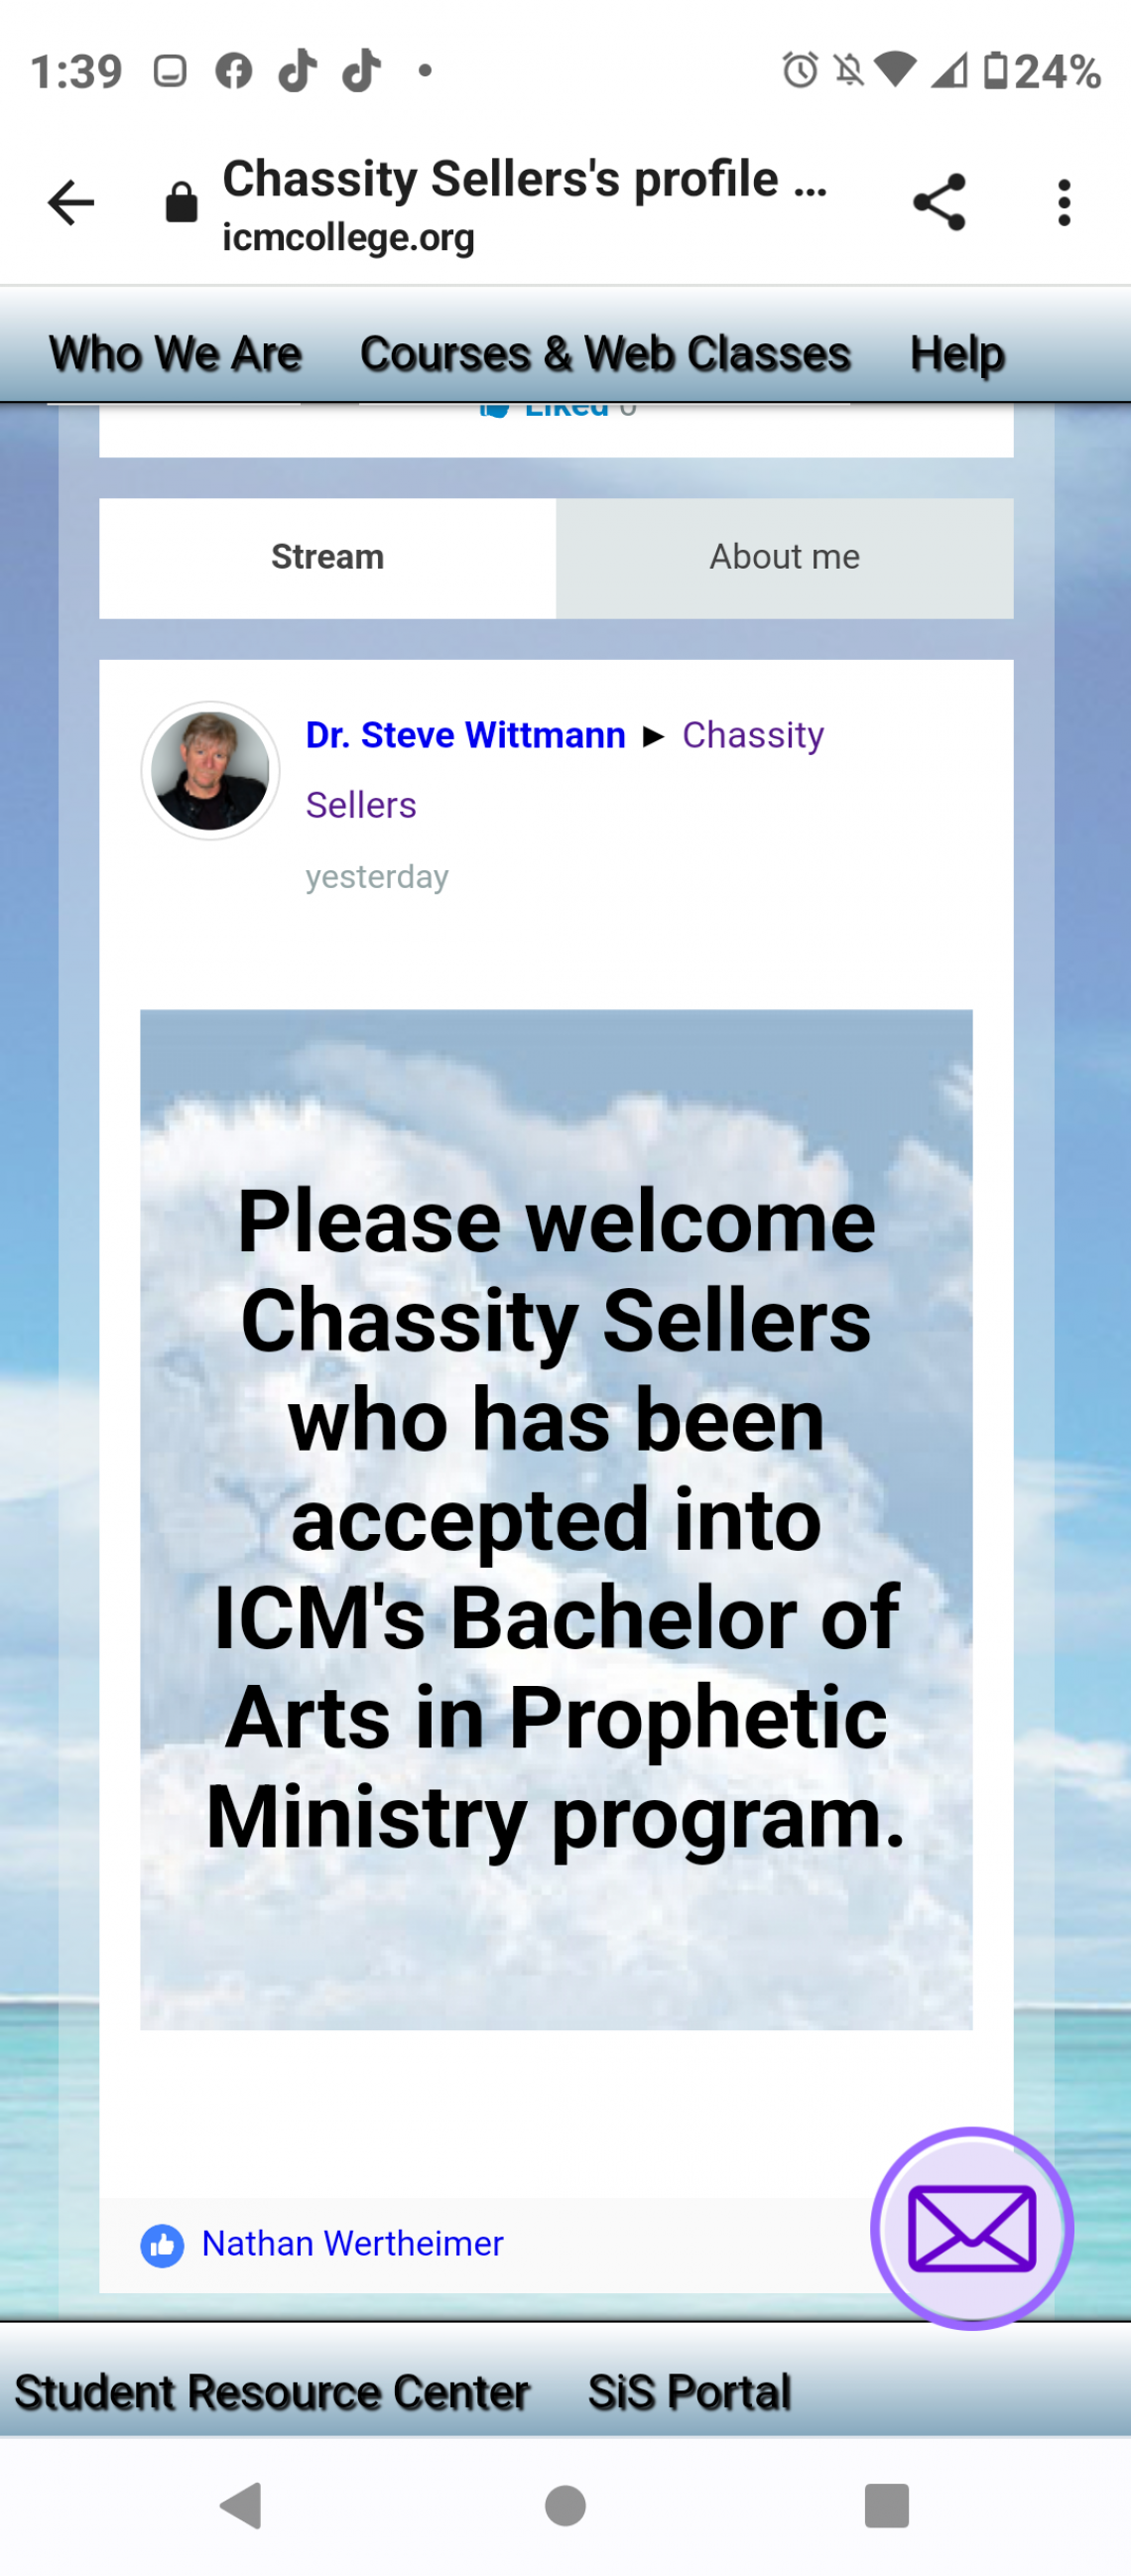 Chassity Sellers